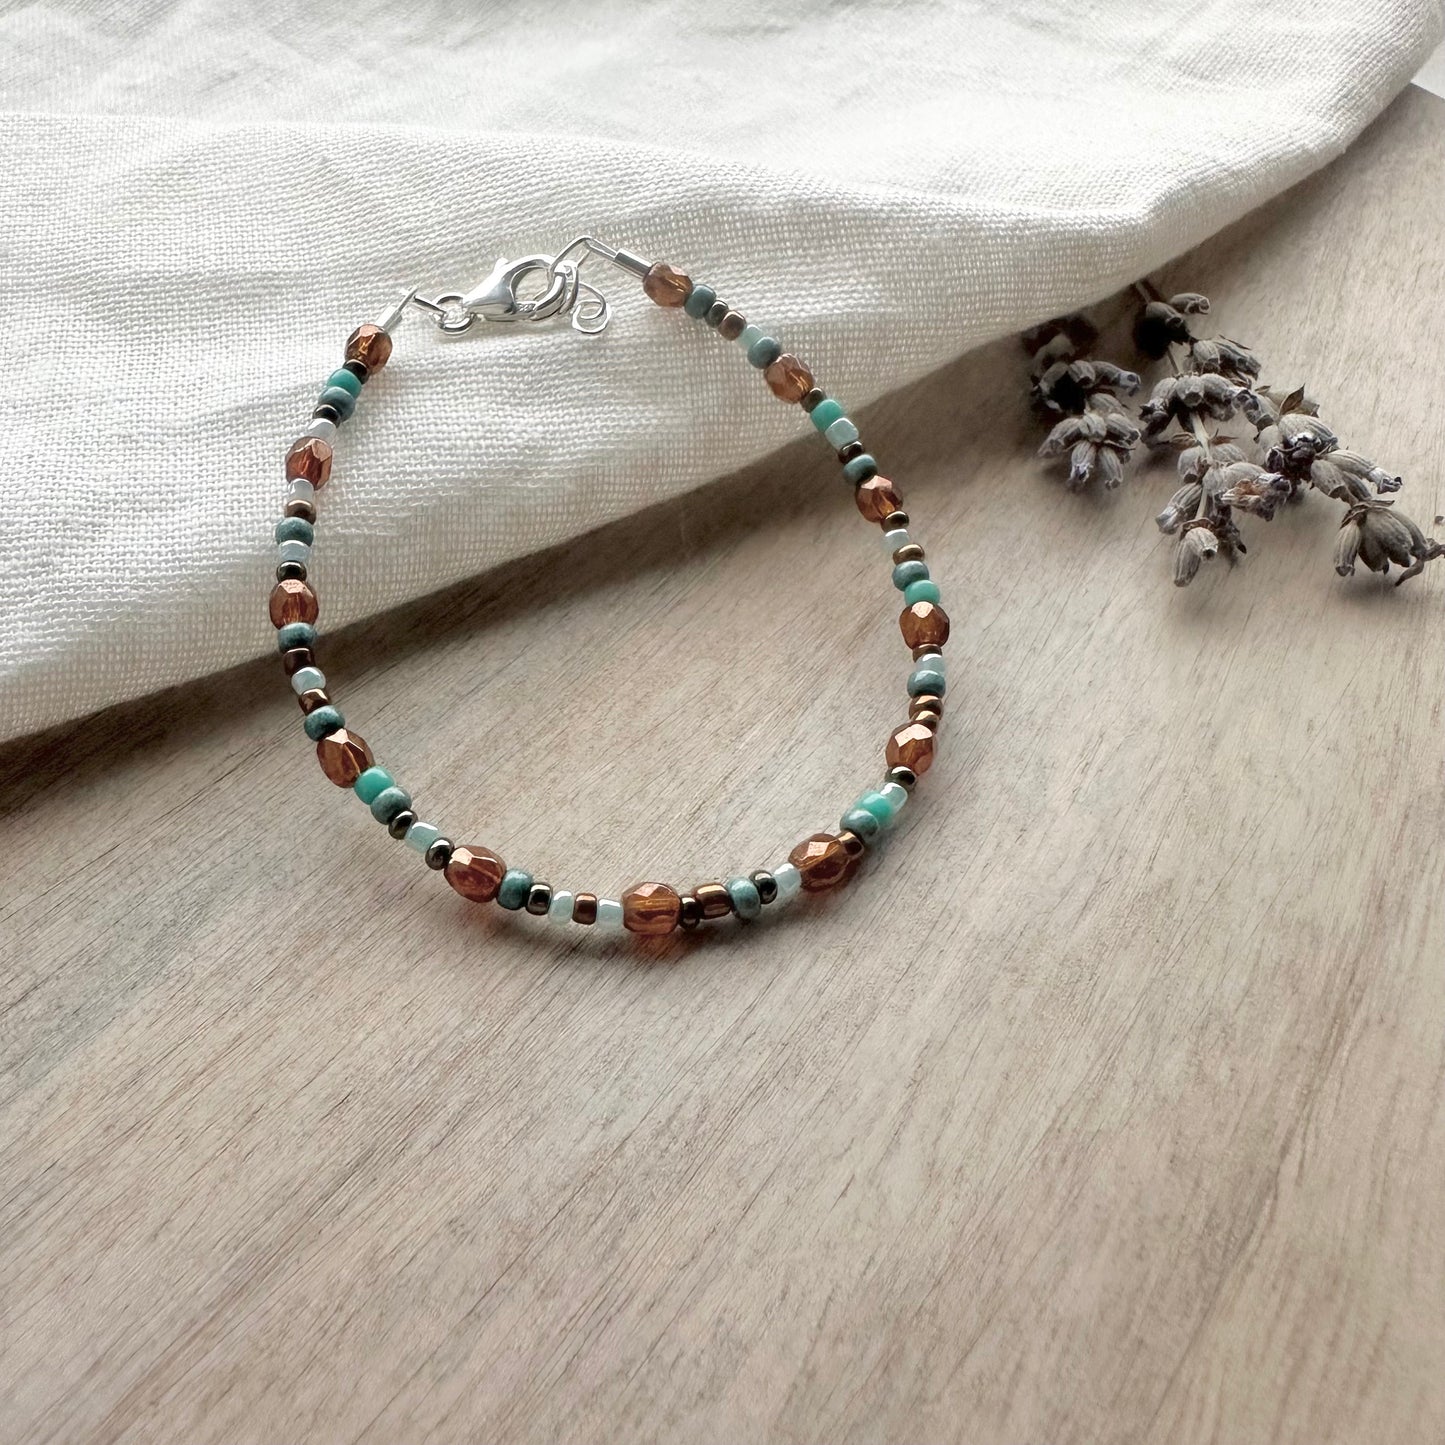 Brown and Teal duck egg tones glass seed bead bracelet